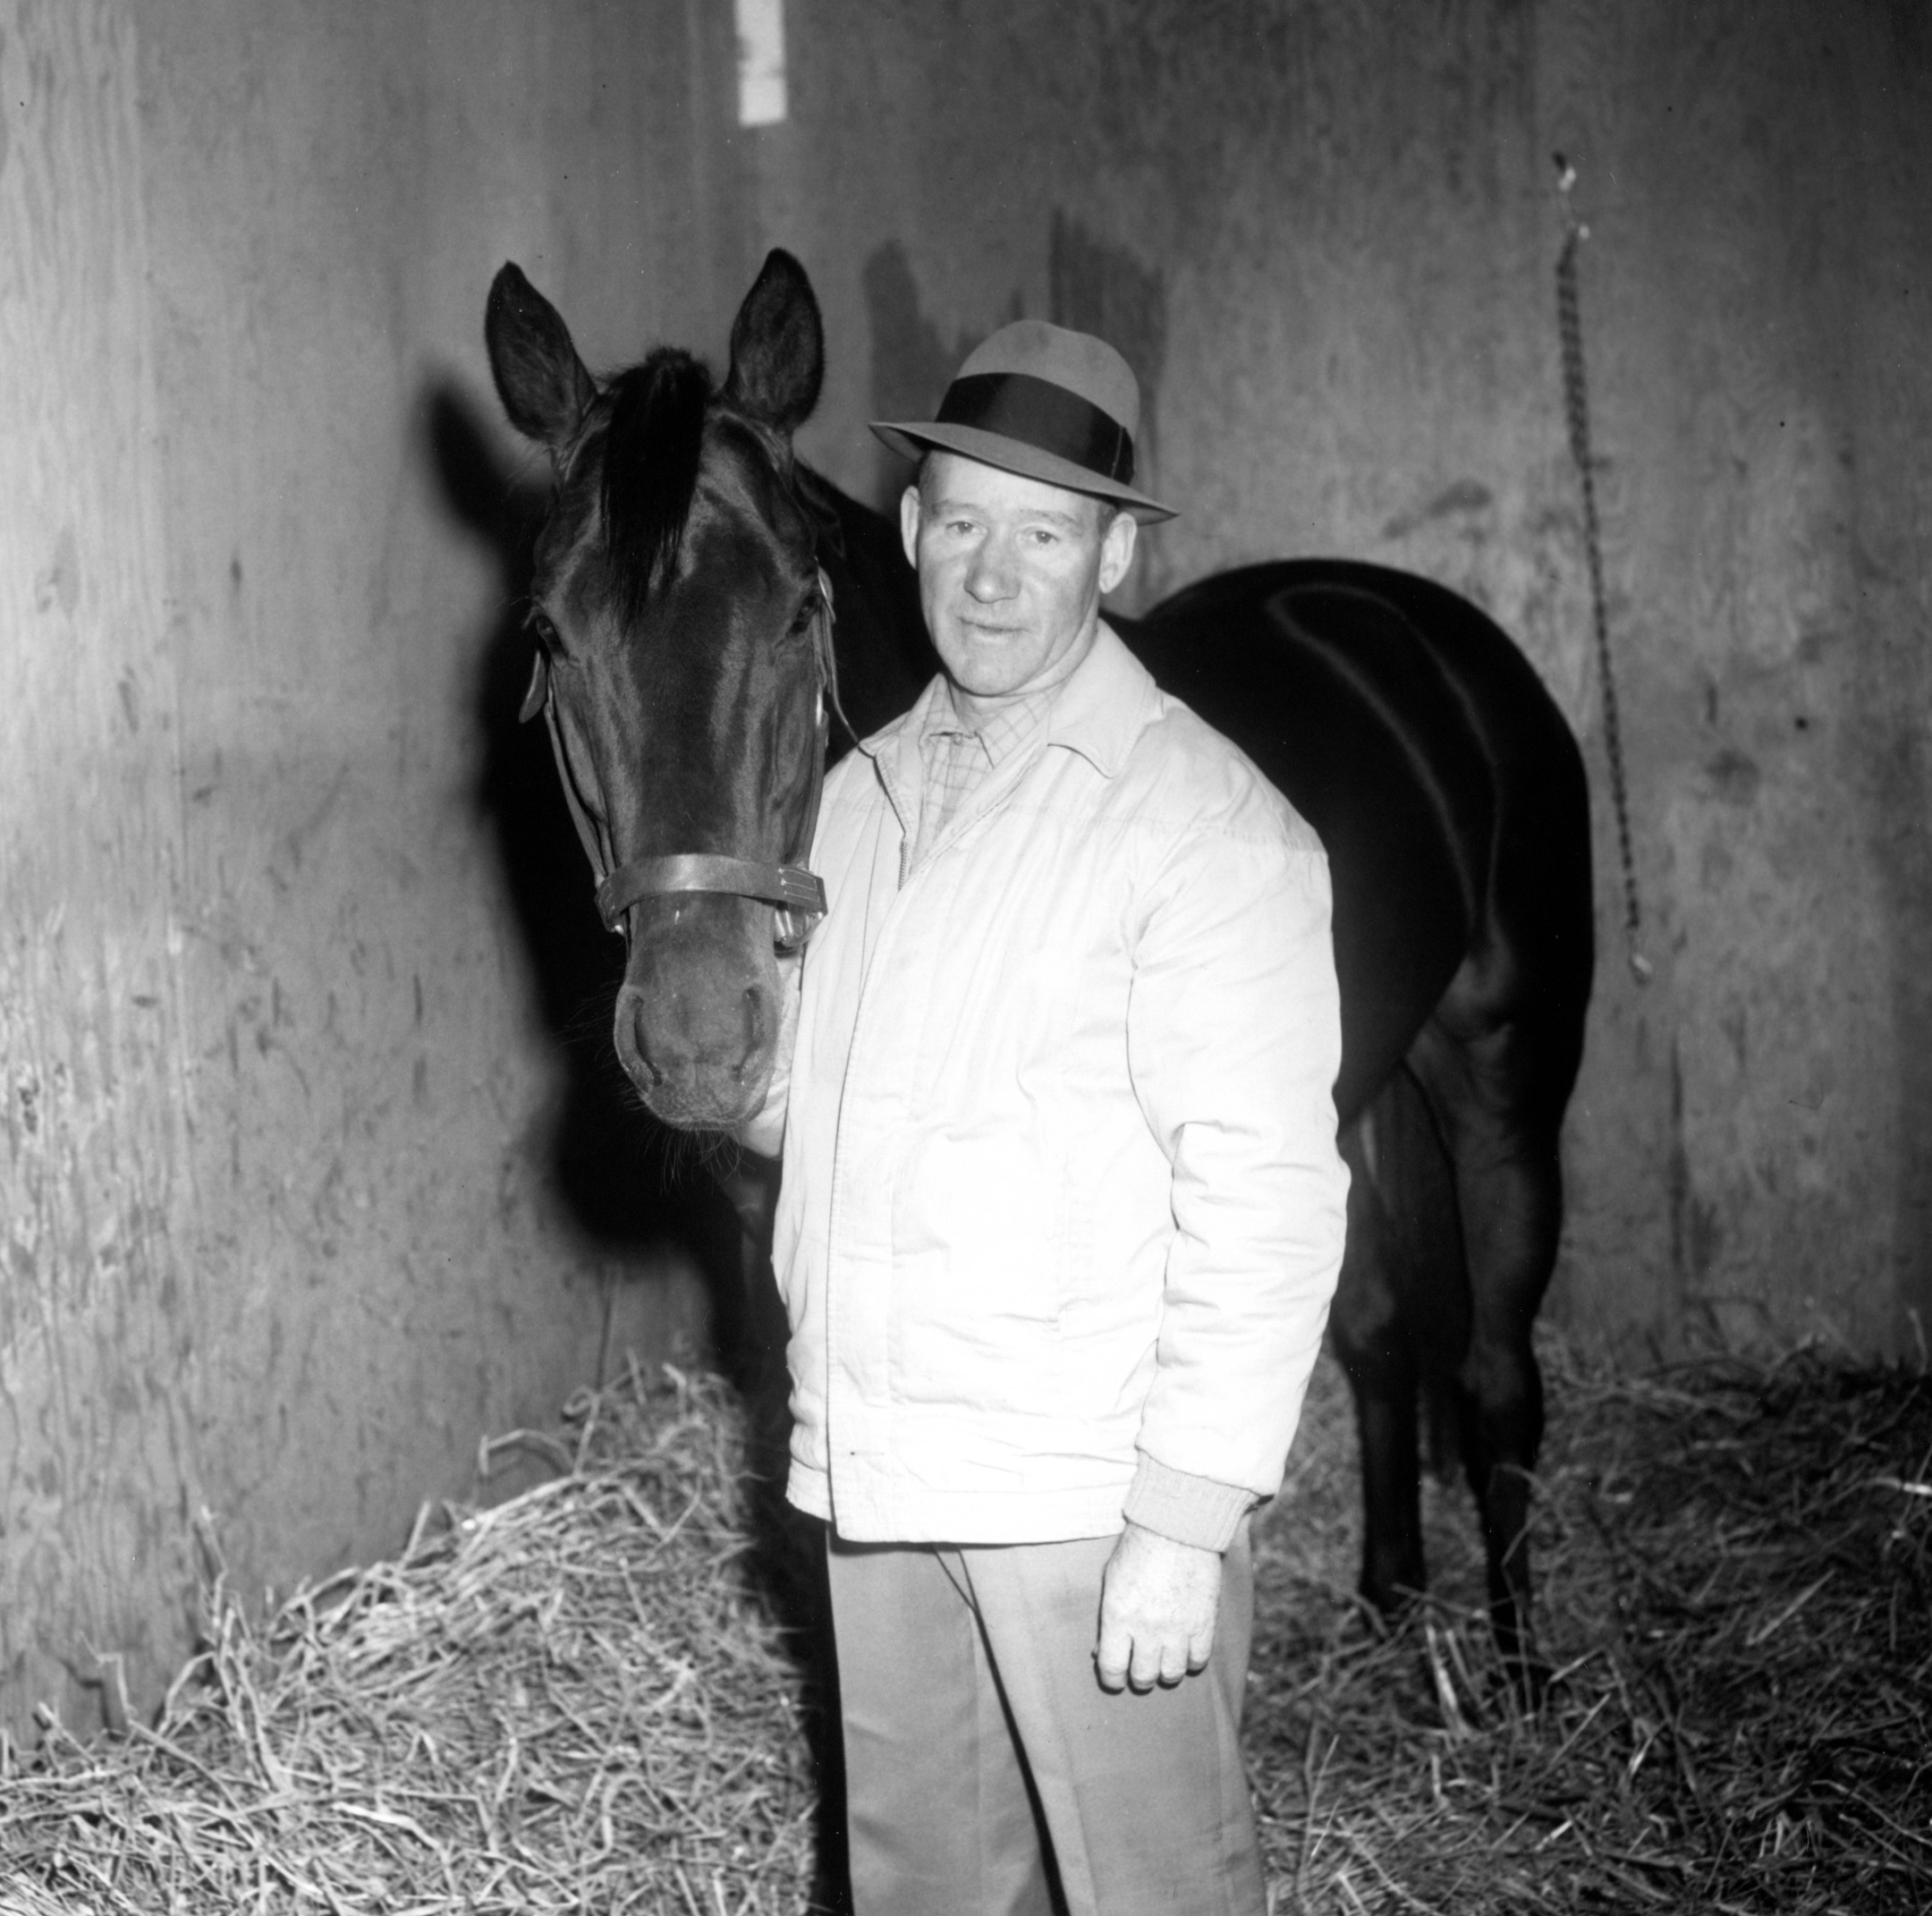 Burley Park with Garwol at Aqueduct, April 1961 (Keeneland Library Morgan Collection/Museum Collection)